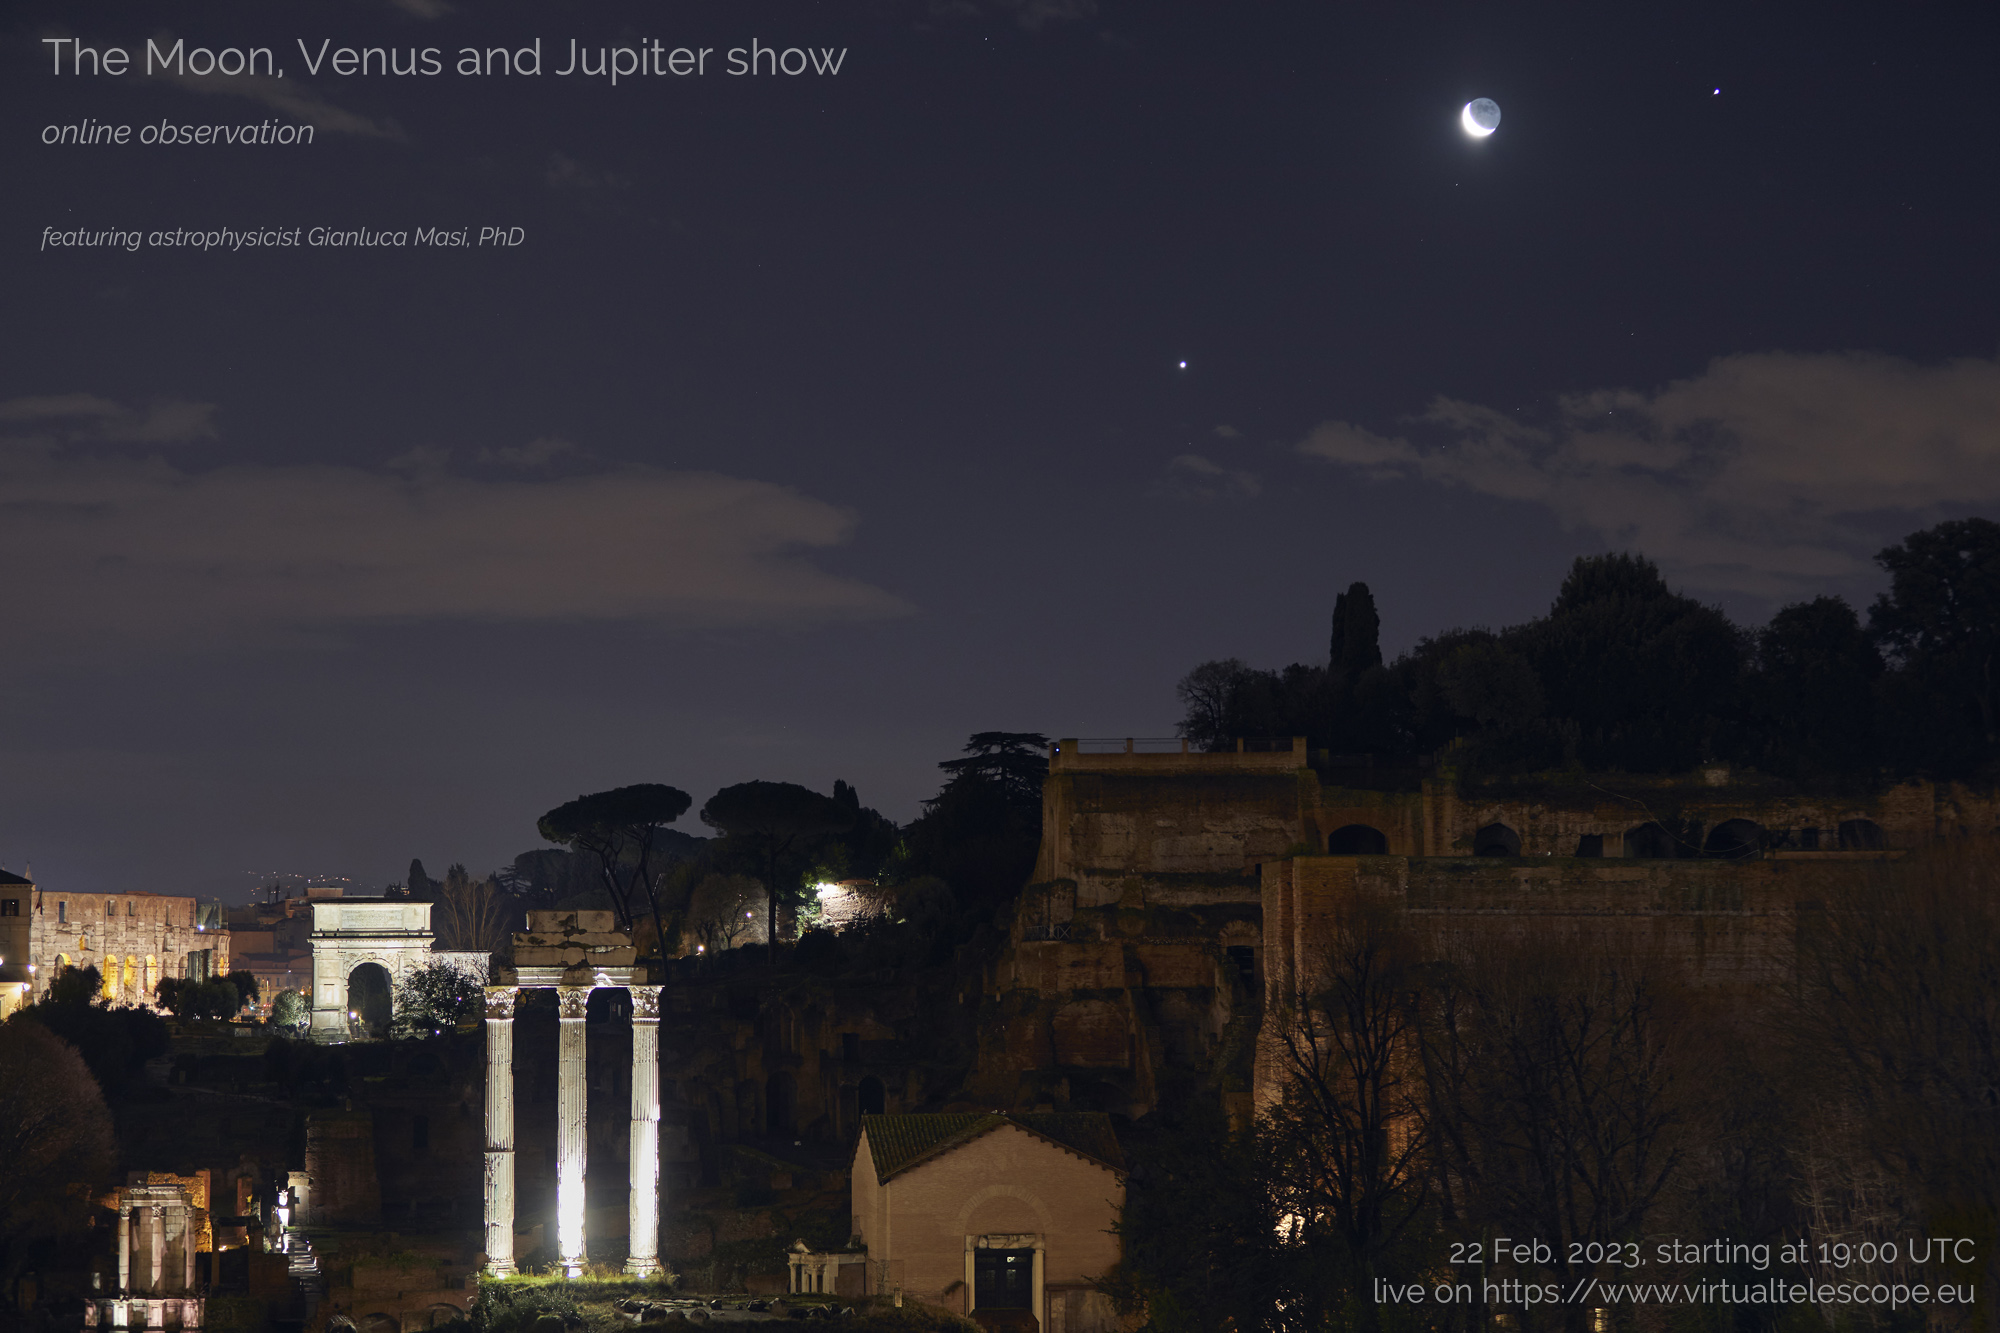 The Moon - Venus - Jupiter show 2023: poster of the event.